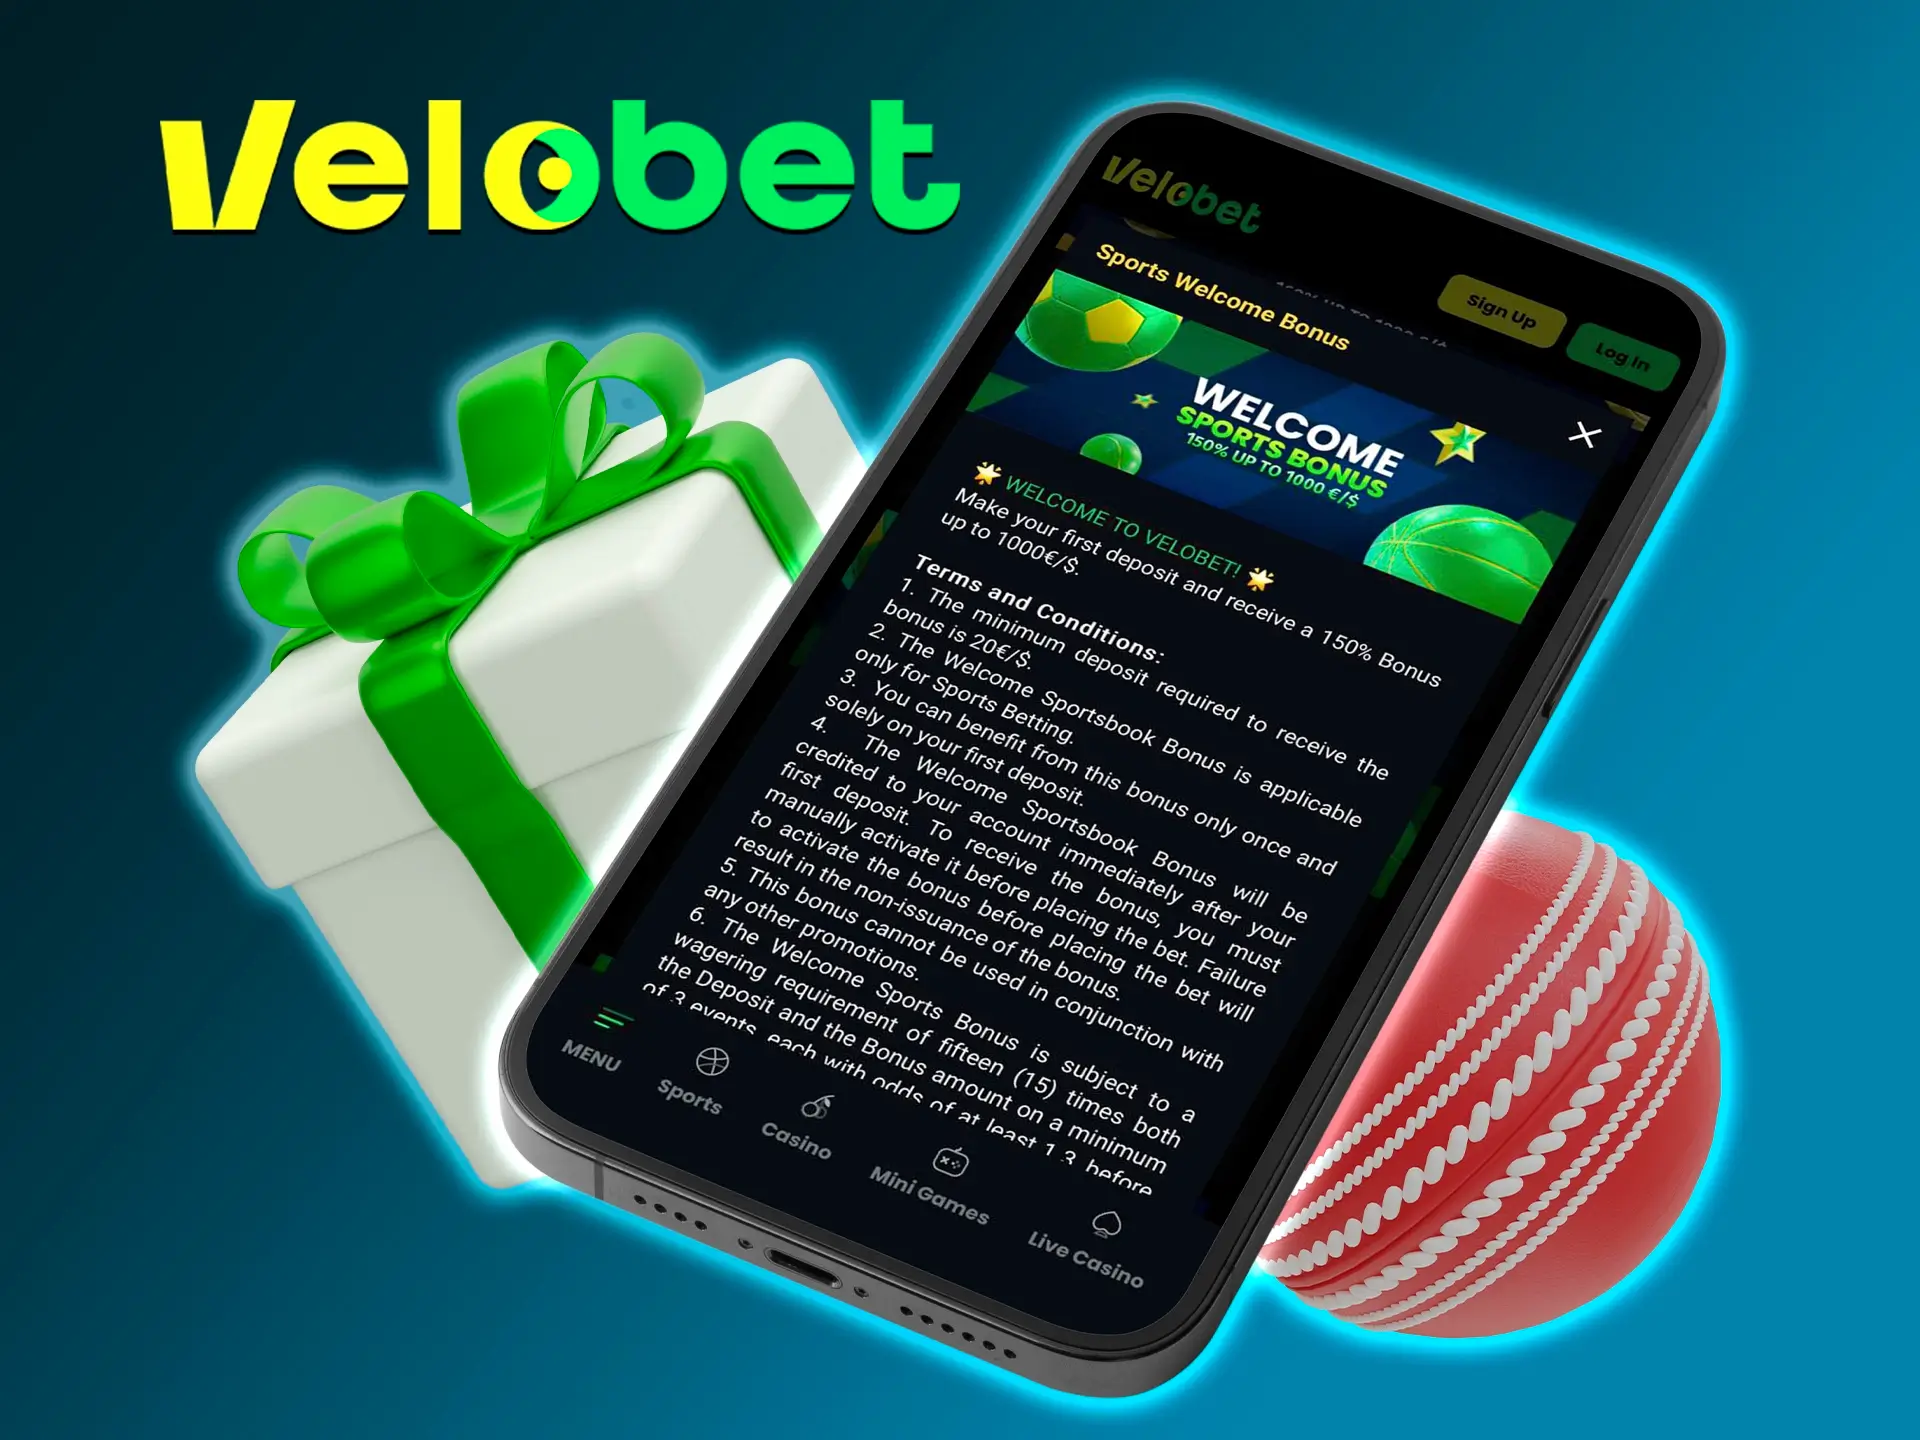 Don't miss the opportunity to boost your betting big time with Velobet's welcome sports bonus.